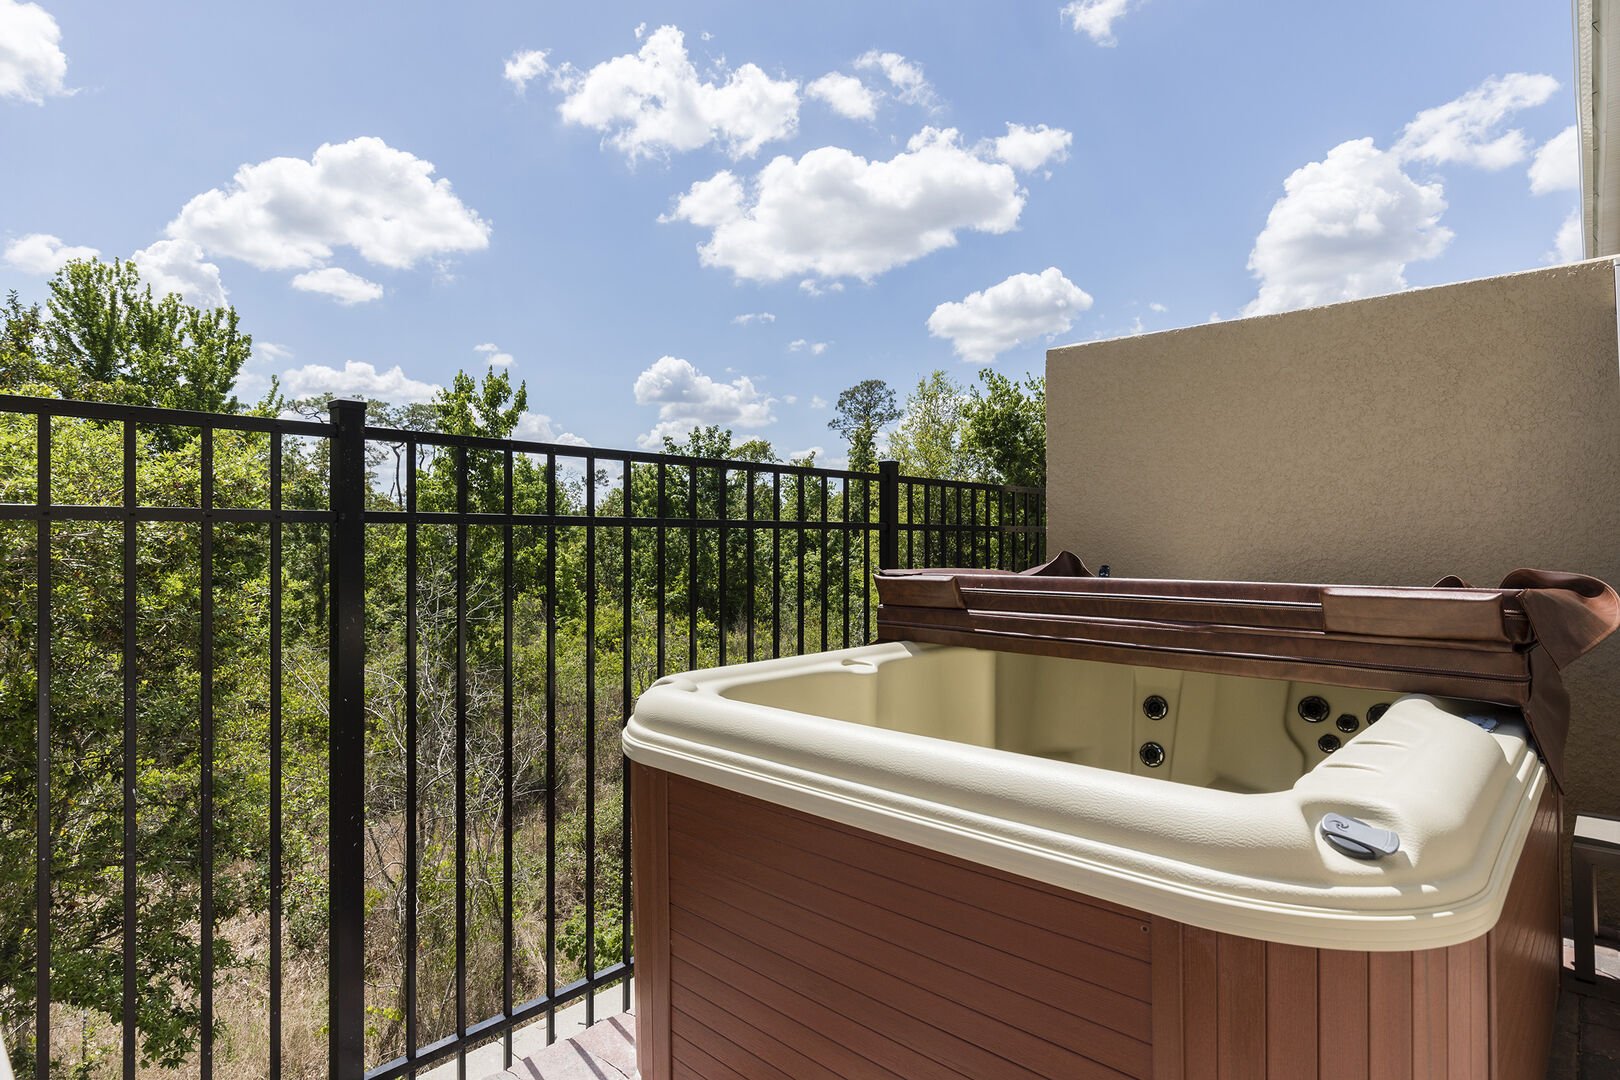 Enjoy a relaxing time in the hot tub!